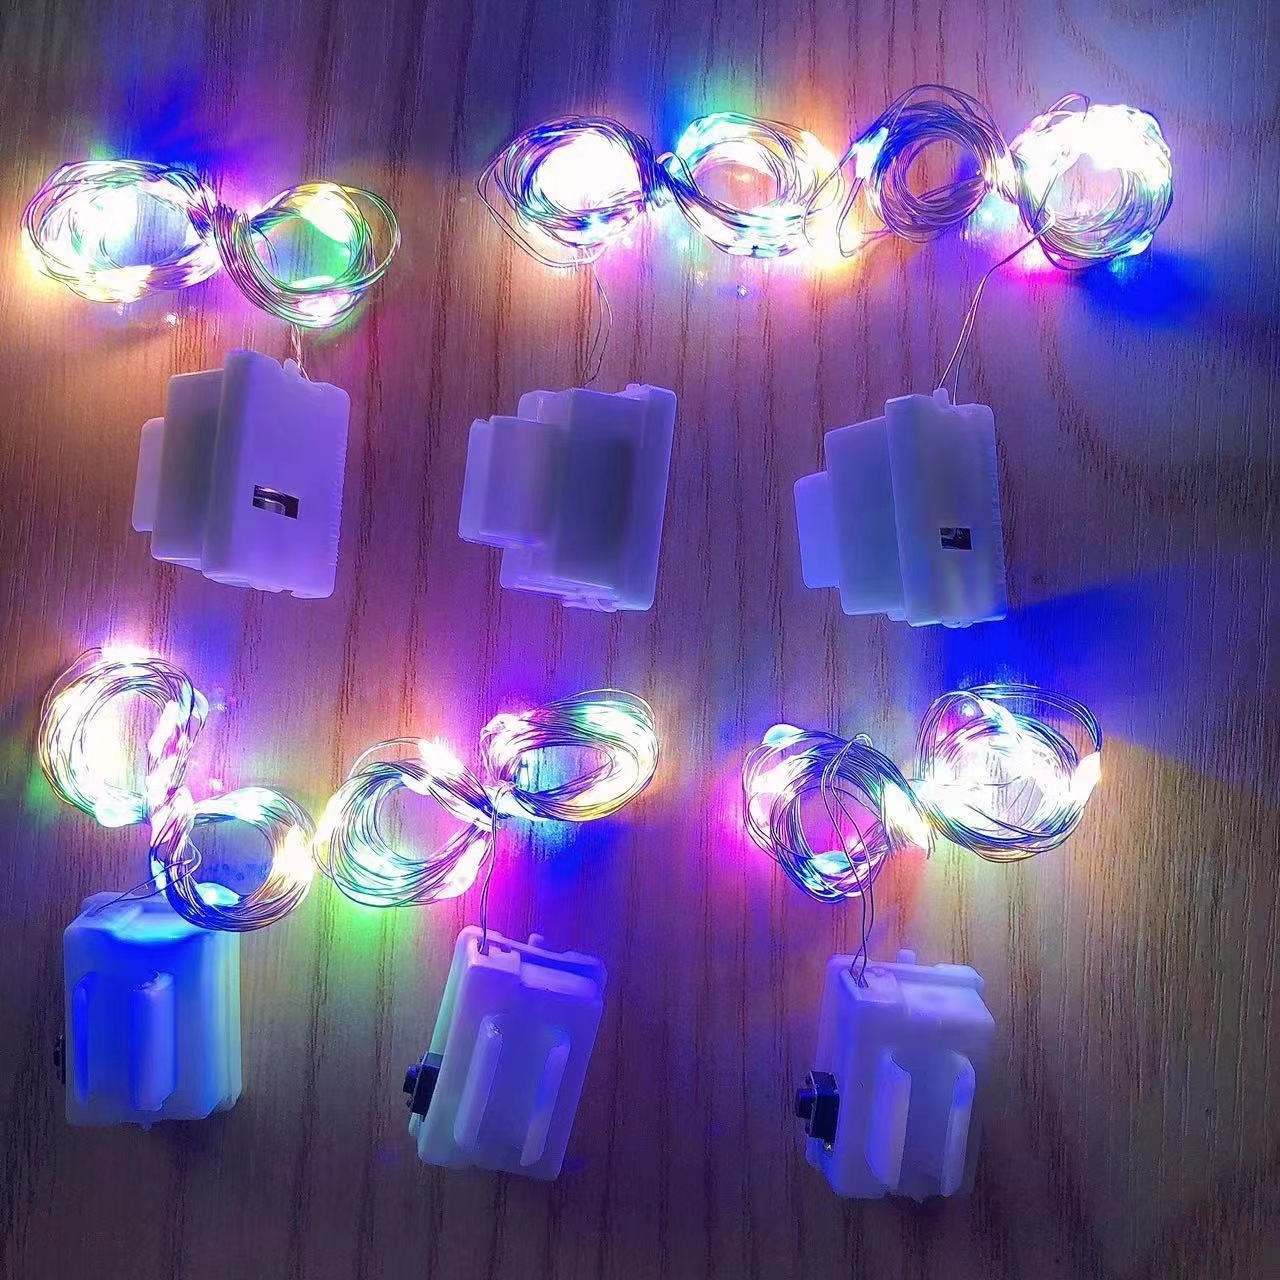 Buckle Bounce Ball Lighting Chain LED Flash Warm Color String Light 2 M 3 M Small White Box Gift Box Lighting Chain Bounce Ball Accessories